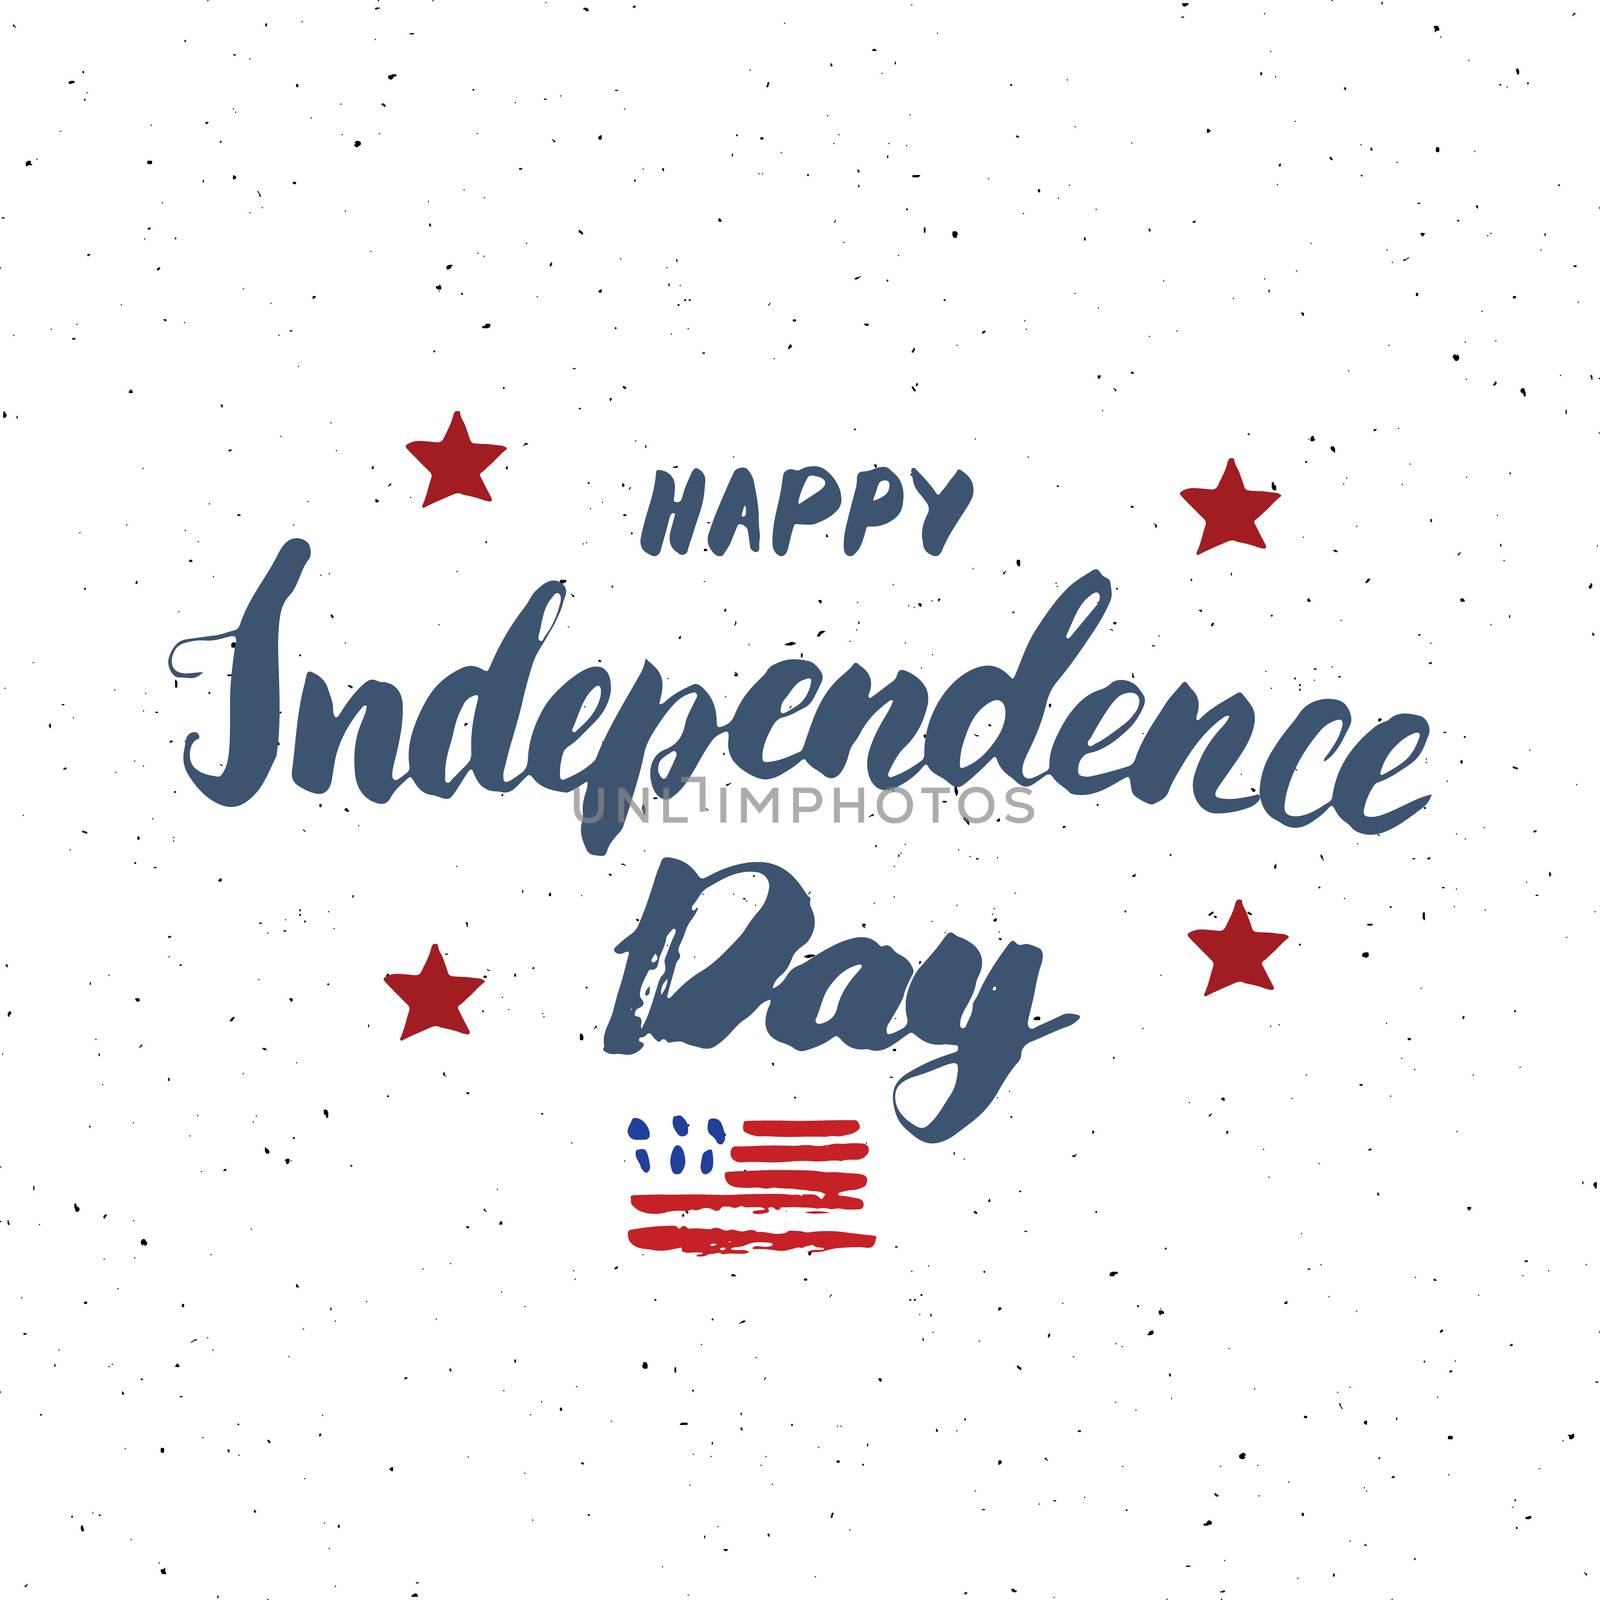 Happy Independence Day Vintage USA greeting card, United States of America celebration. Hand lettering, american holiday grunge textured retro design vector illustration. by Lemon_workshop